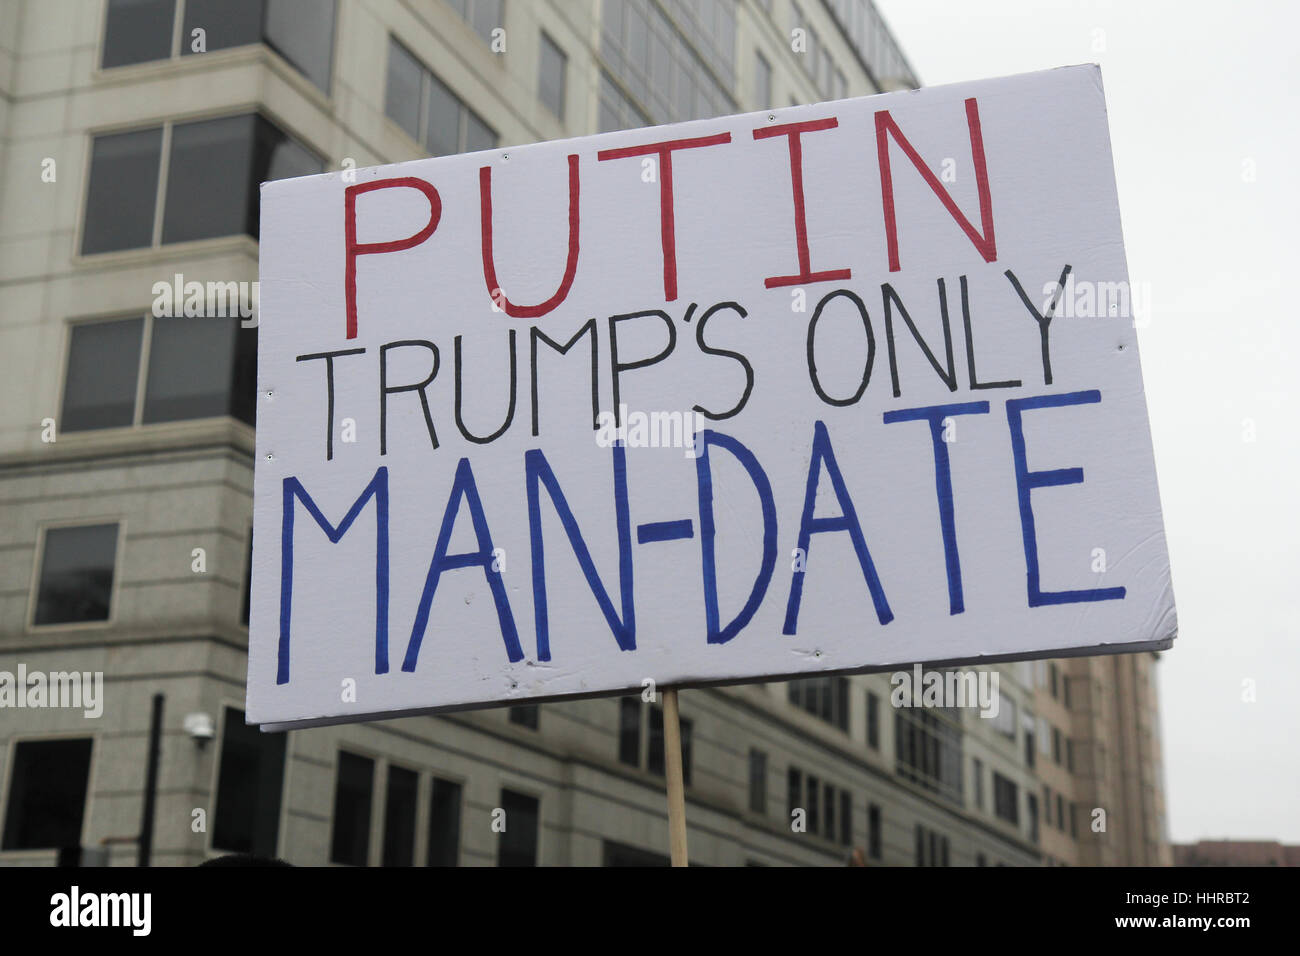 Washington, USA. 20th January, 2017. Sign held by a protester on the day of the inauguration of Donald J Trump as President of the United States. Credit: Susan Pease/Alamy Live News Stock Photo